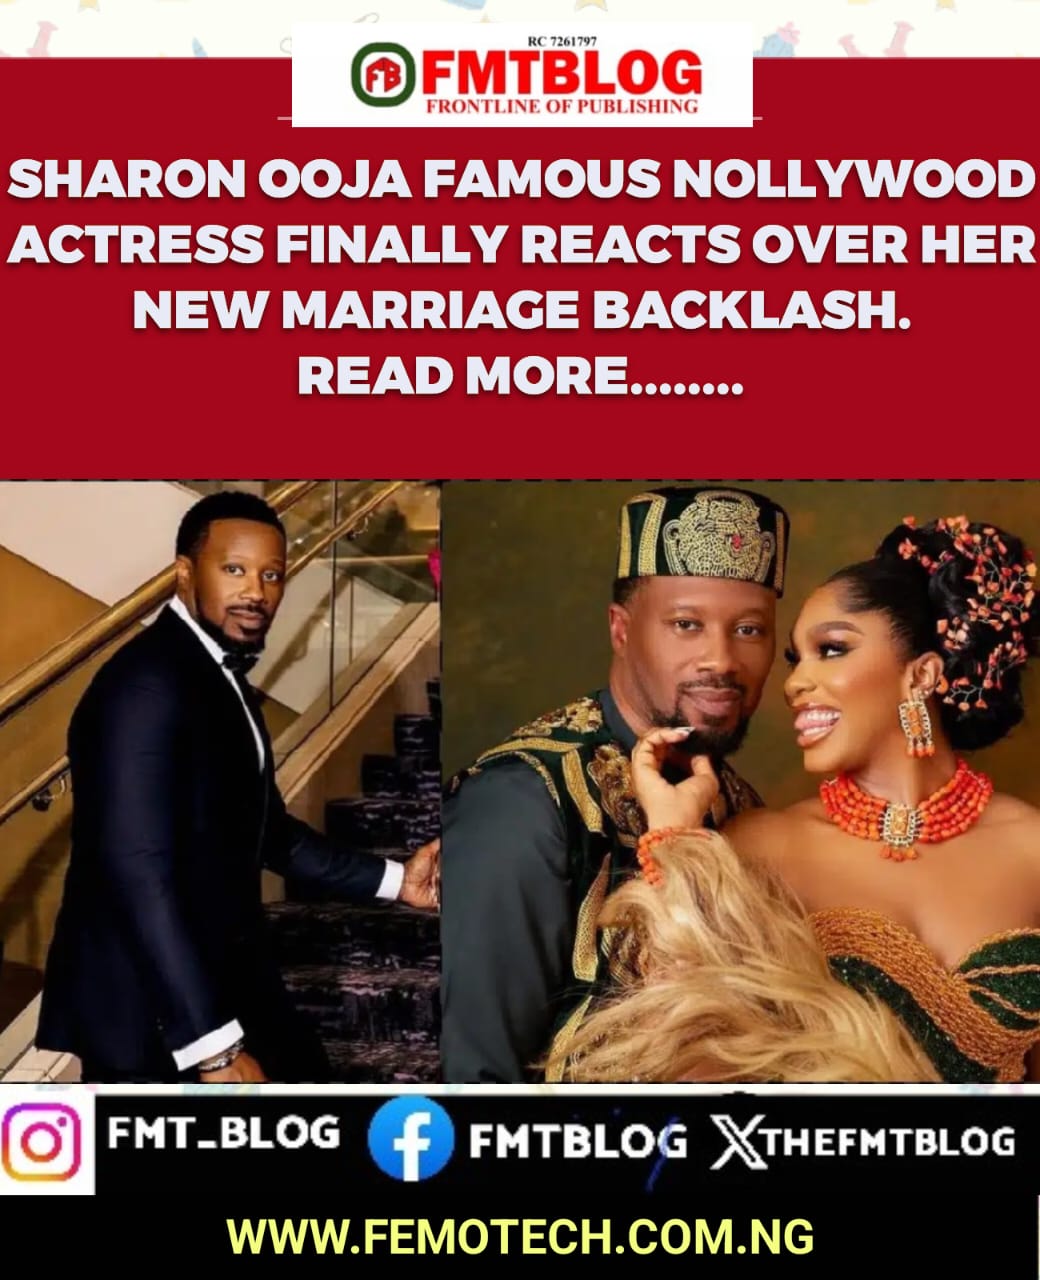 Sharon Ooja, Famous Nollywood Actress Finally Reacts Over Her New Marriage Backlash